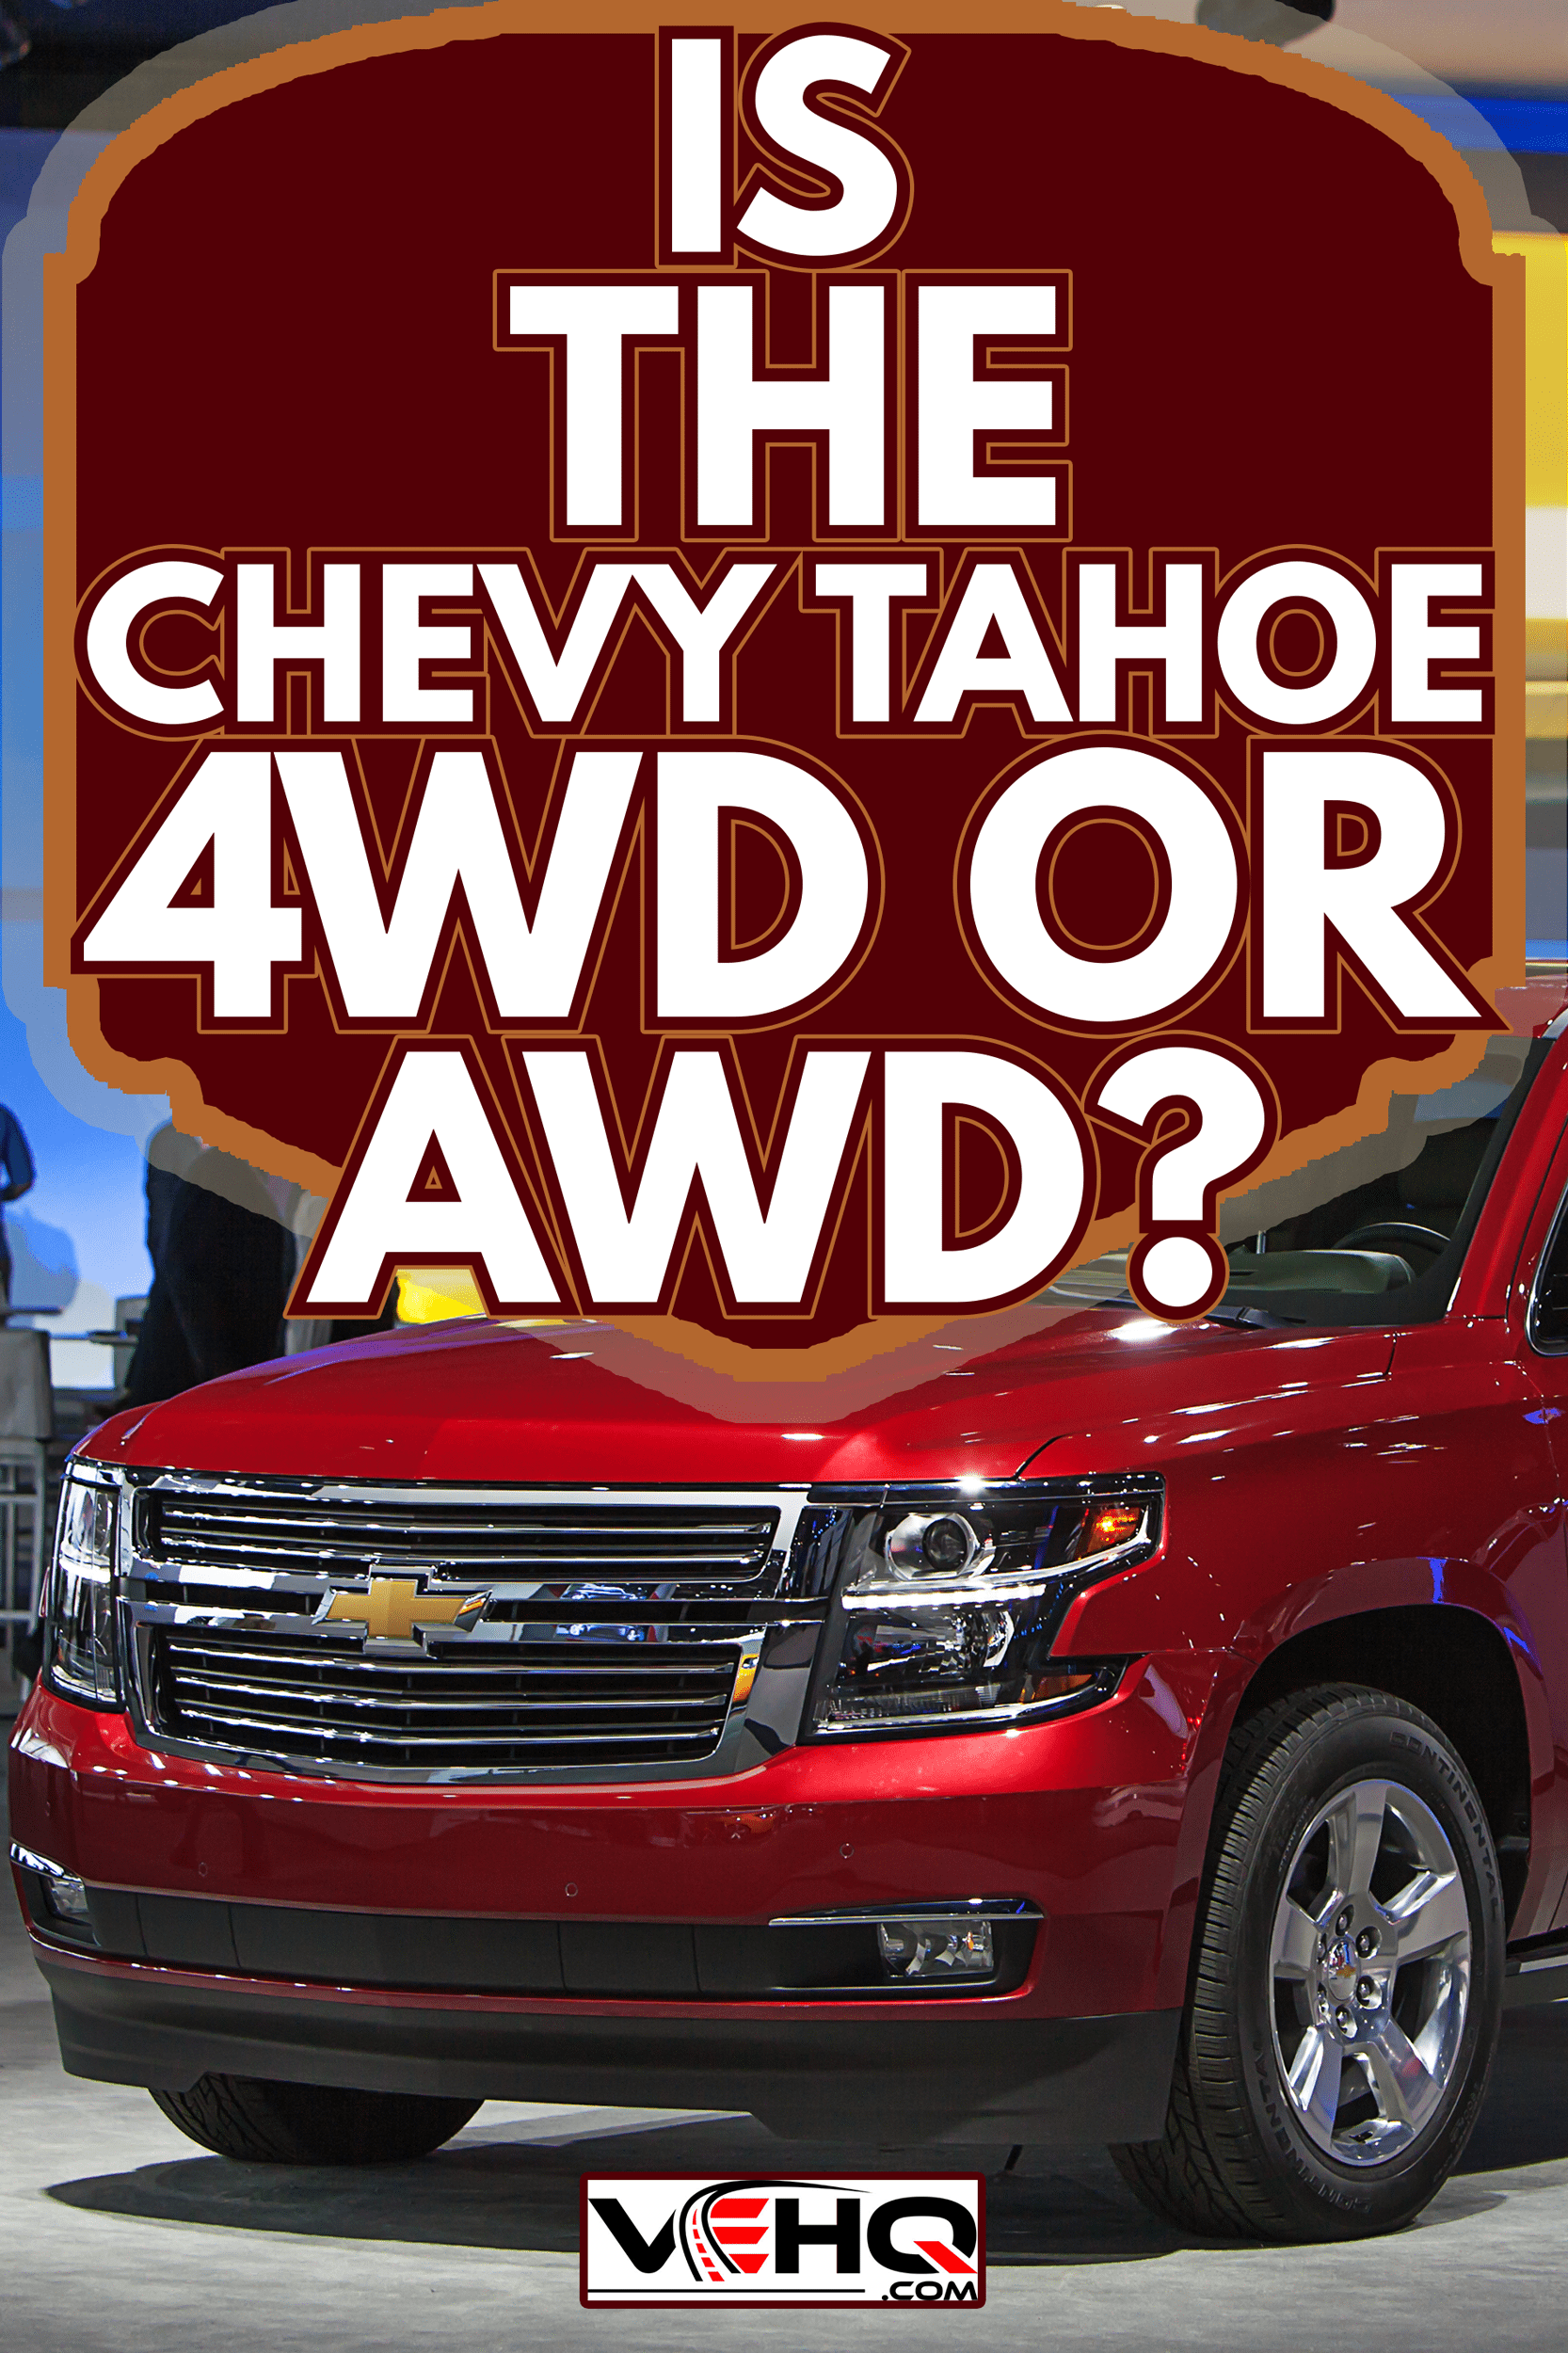 The 2015 Chevy Tahoe on display - Is The Chevy Tahoe 4WD Or AWD